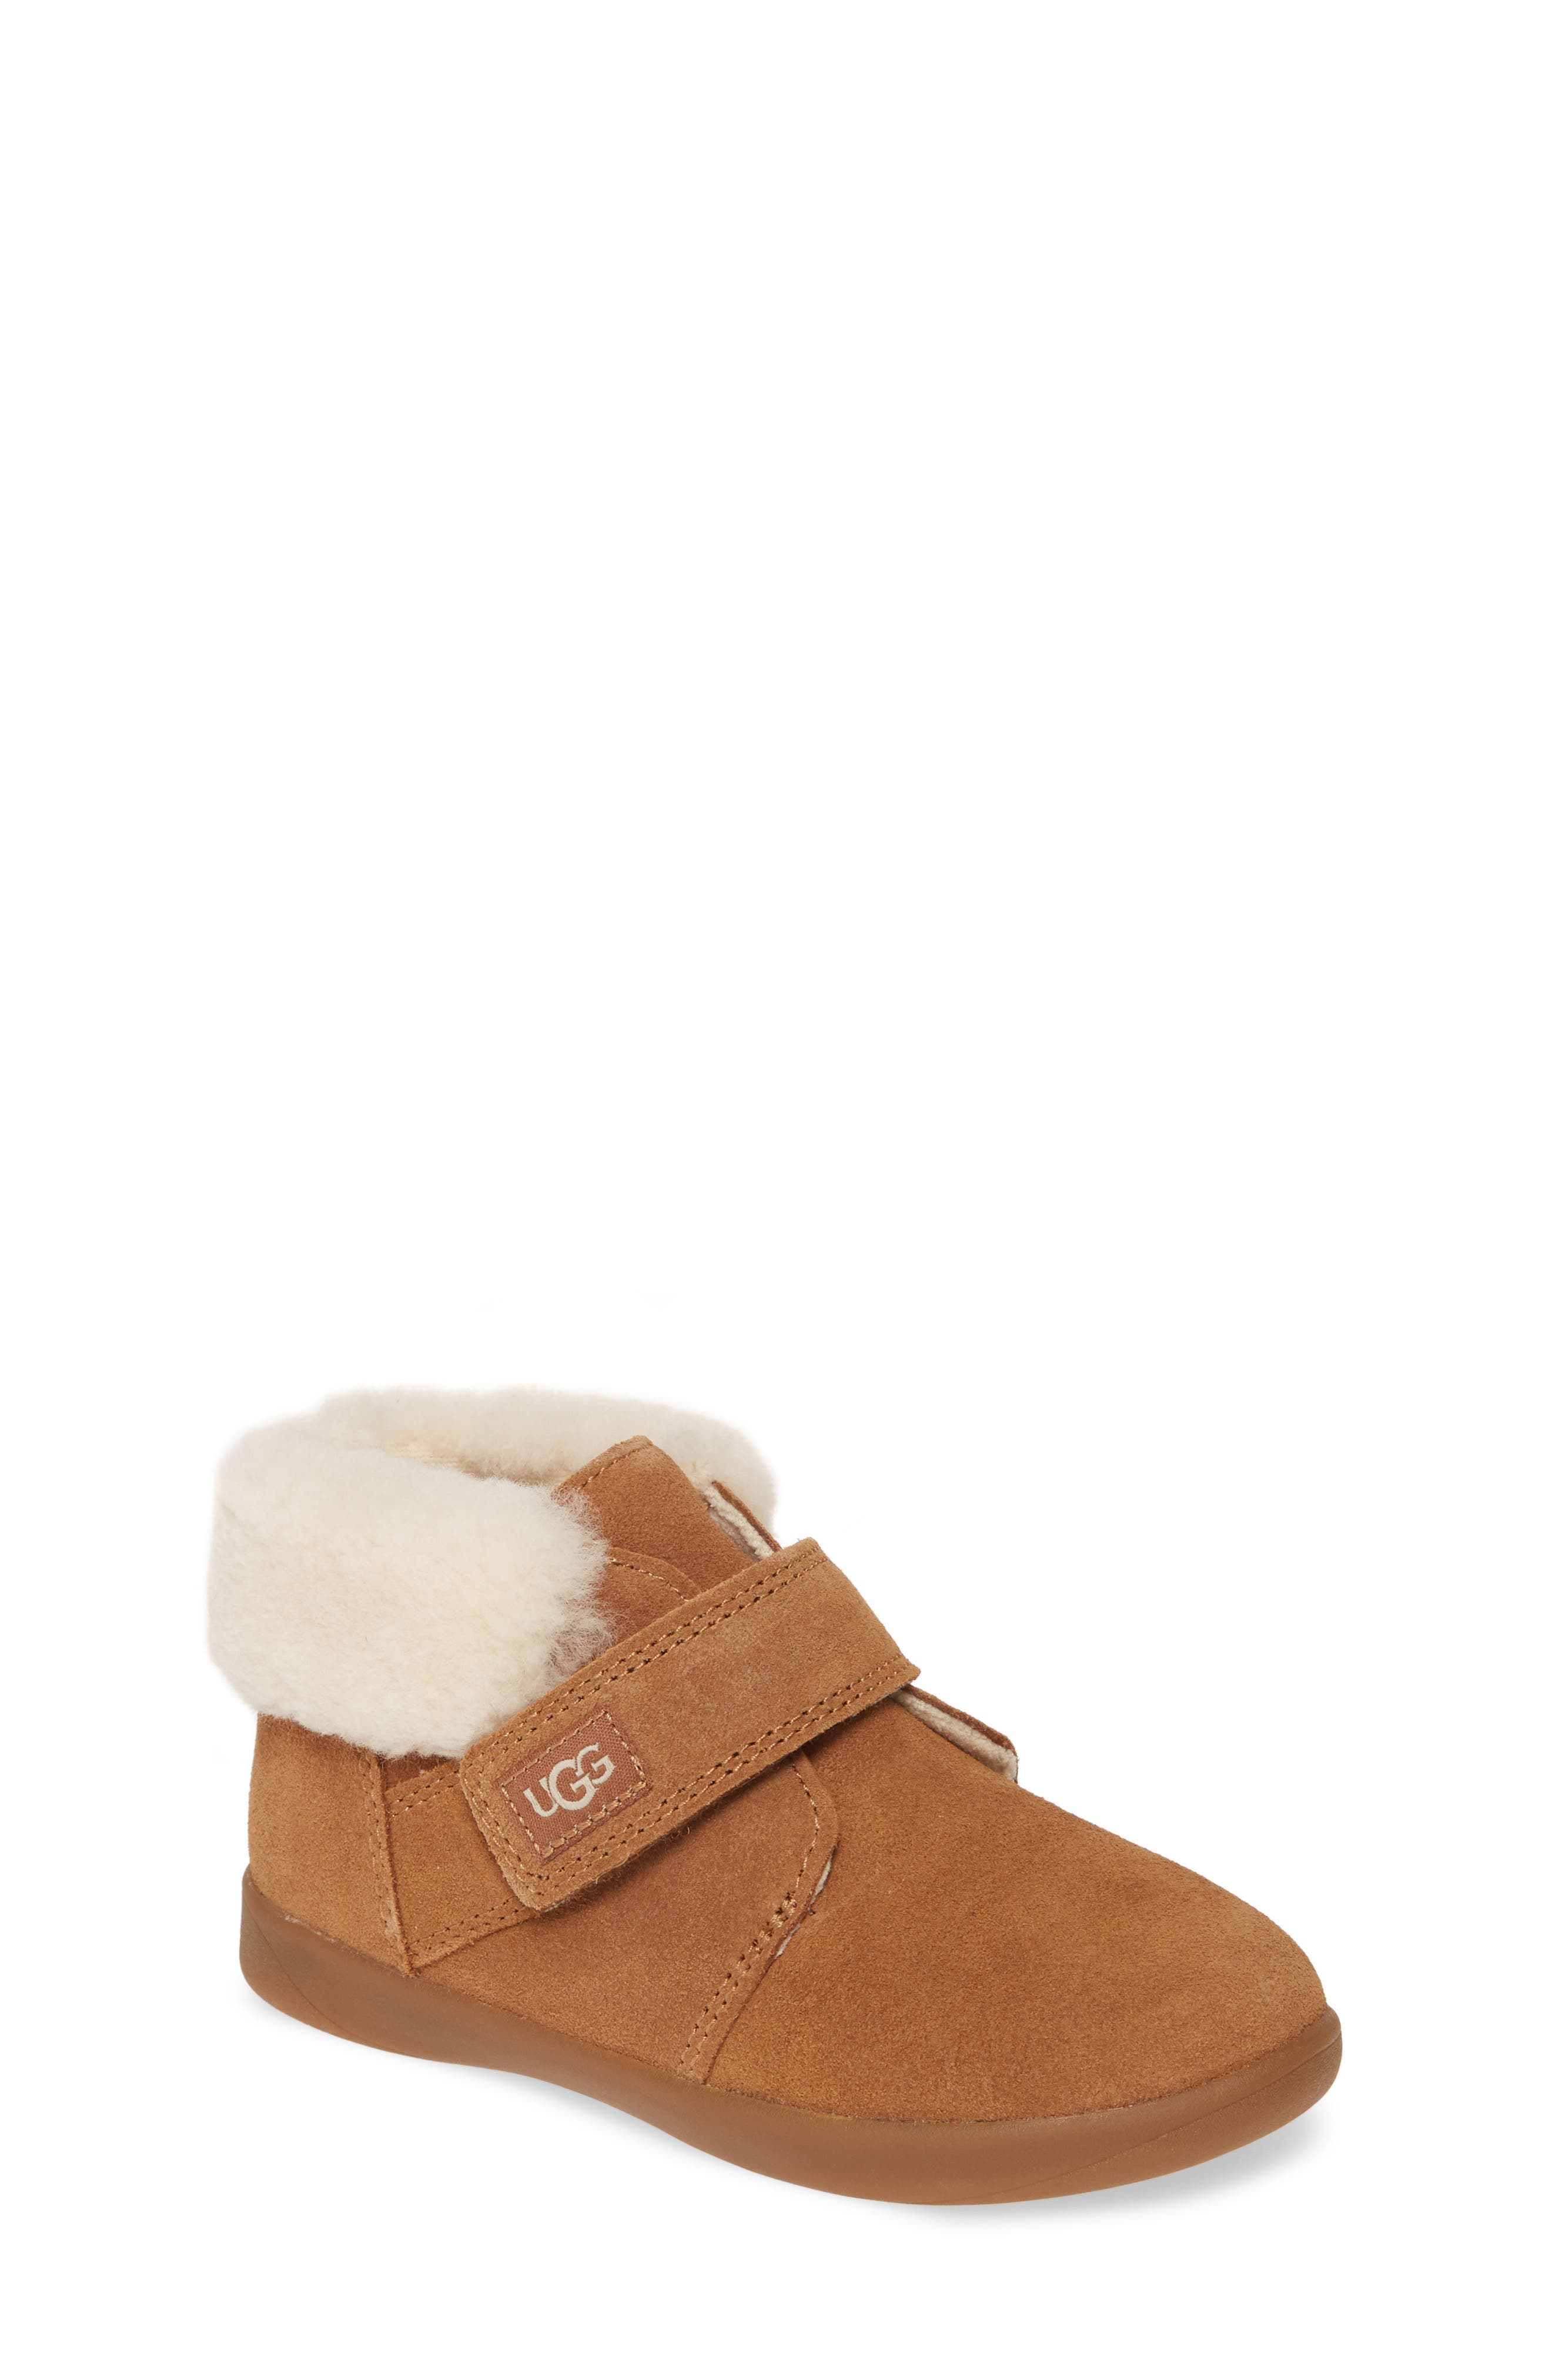 toddler uggs size 5